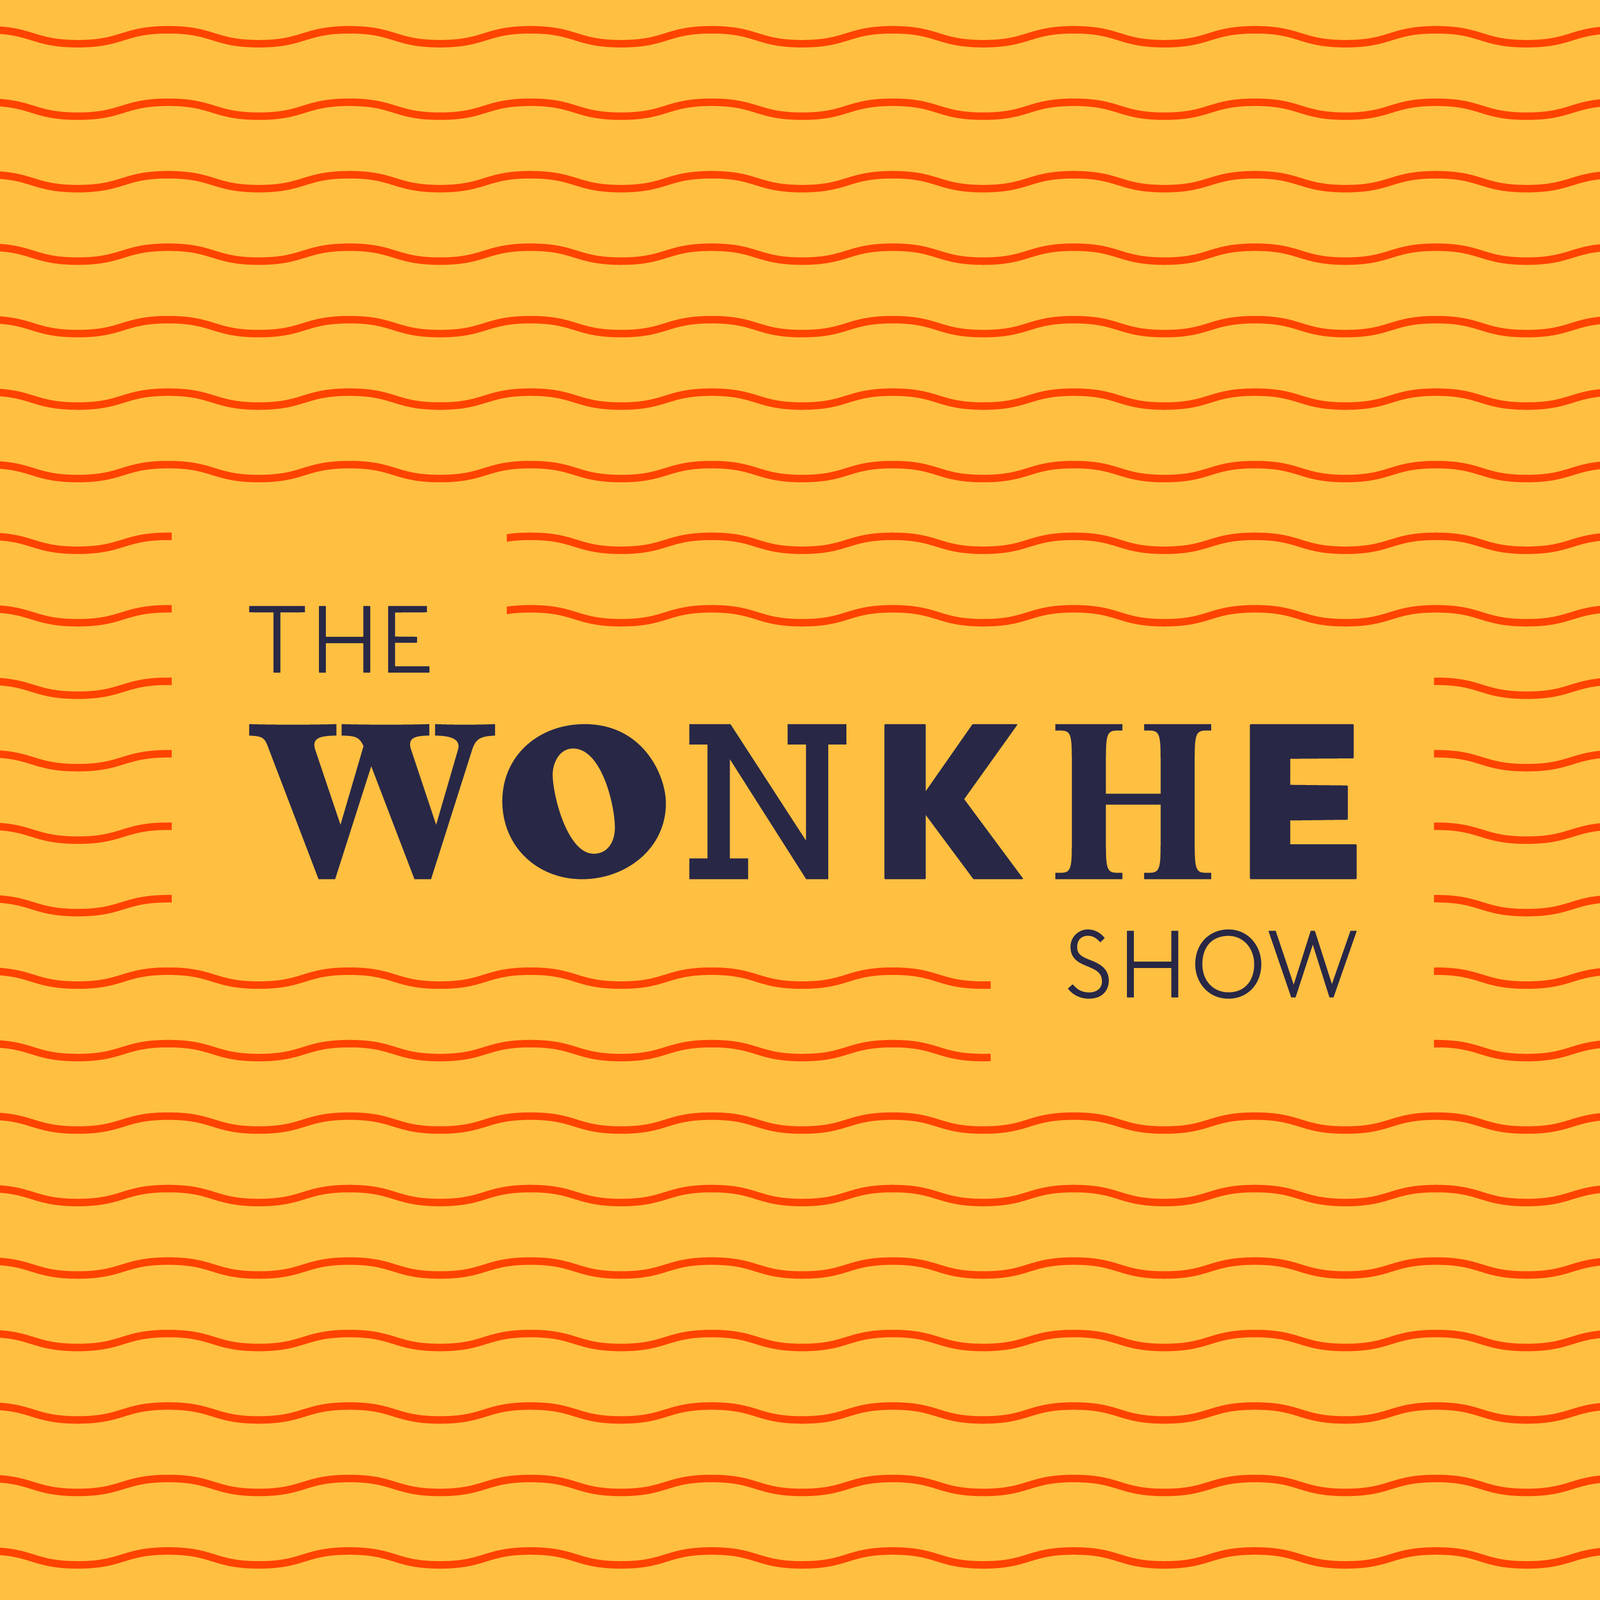 Live from Wonkfest 2019